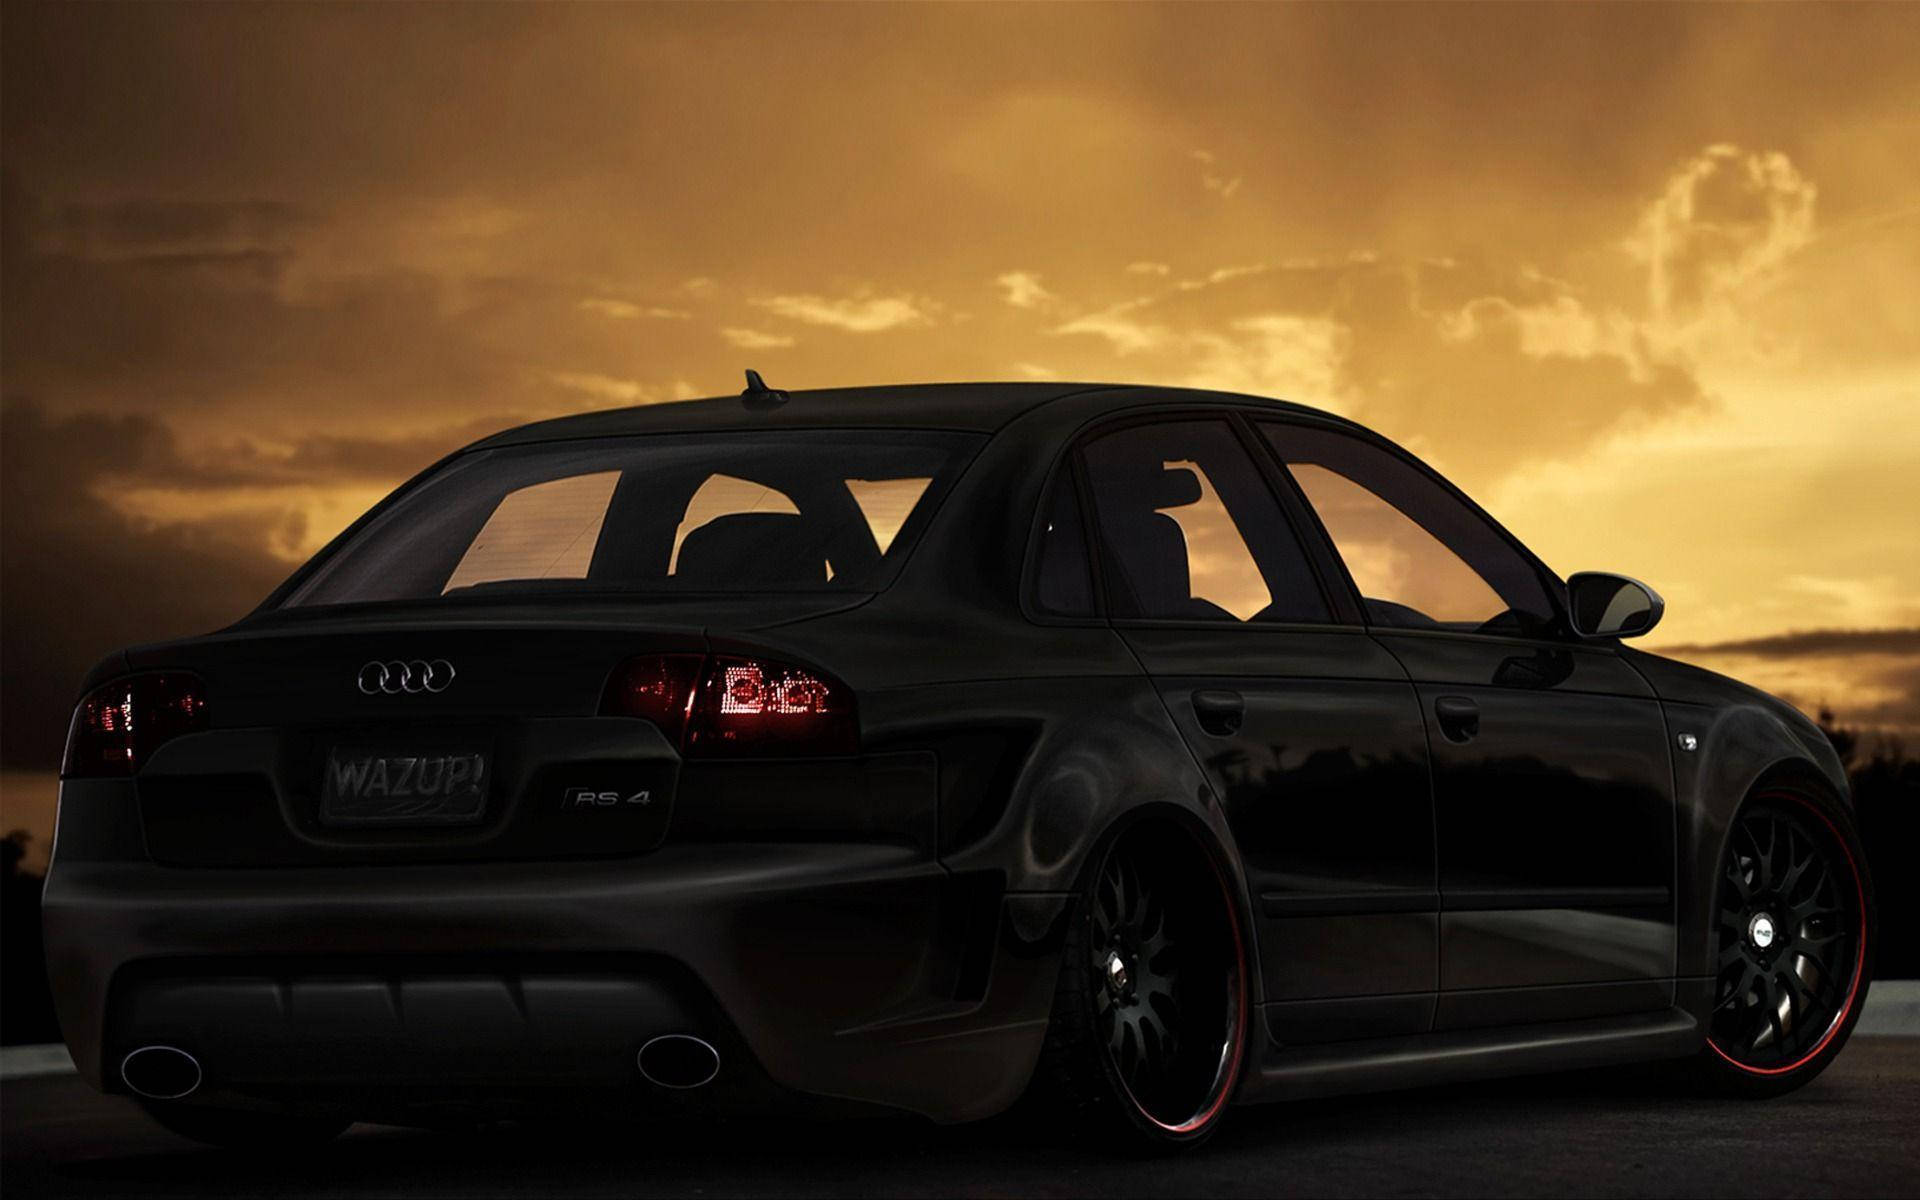 Silhouette Of The 2007 Audi Rs 4 Background